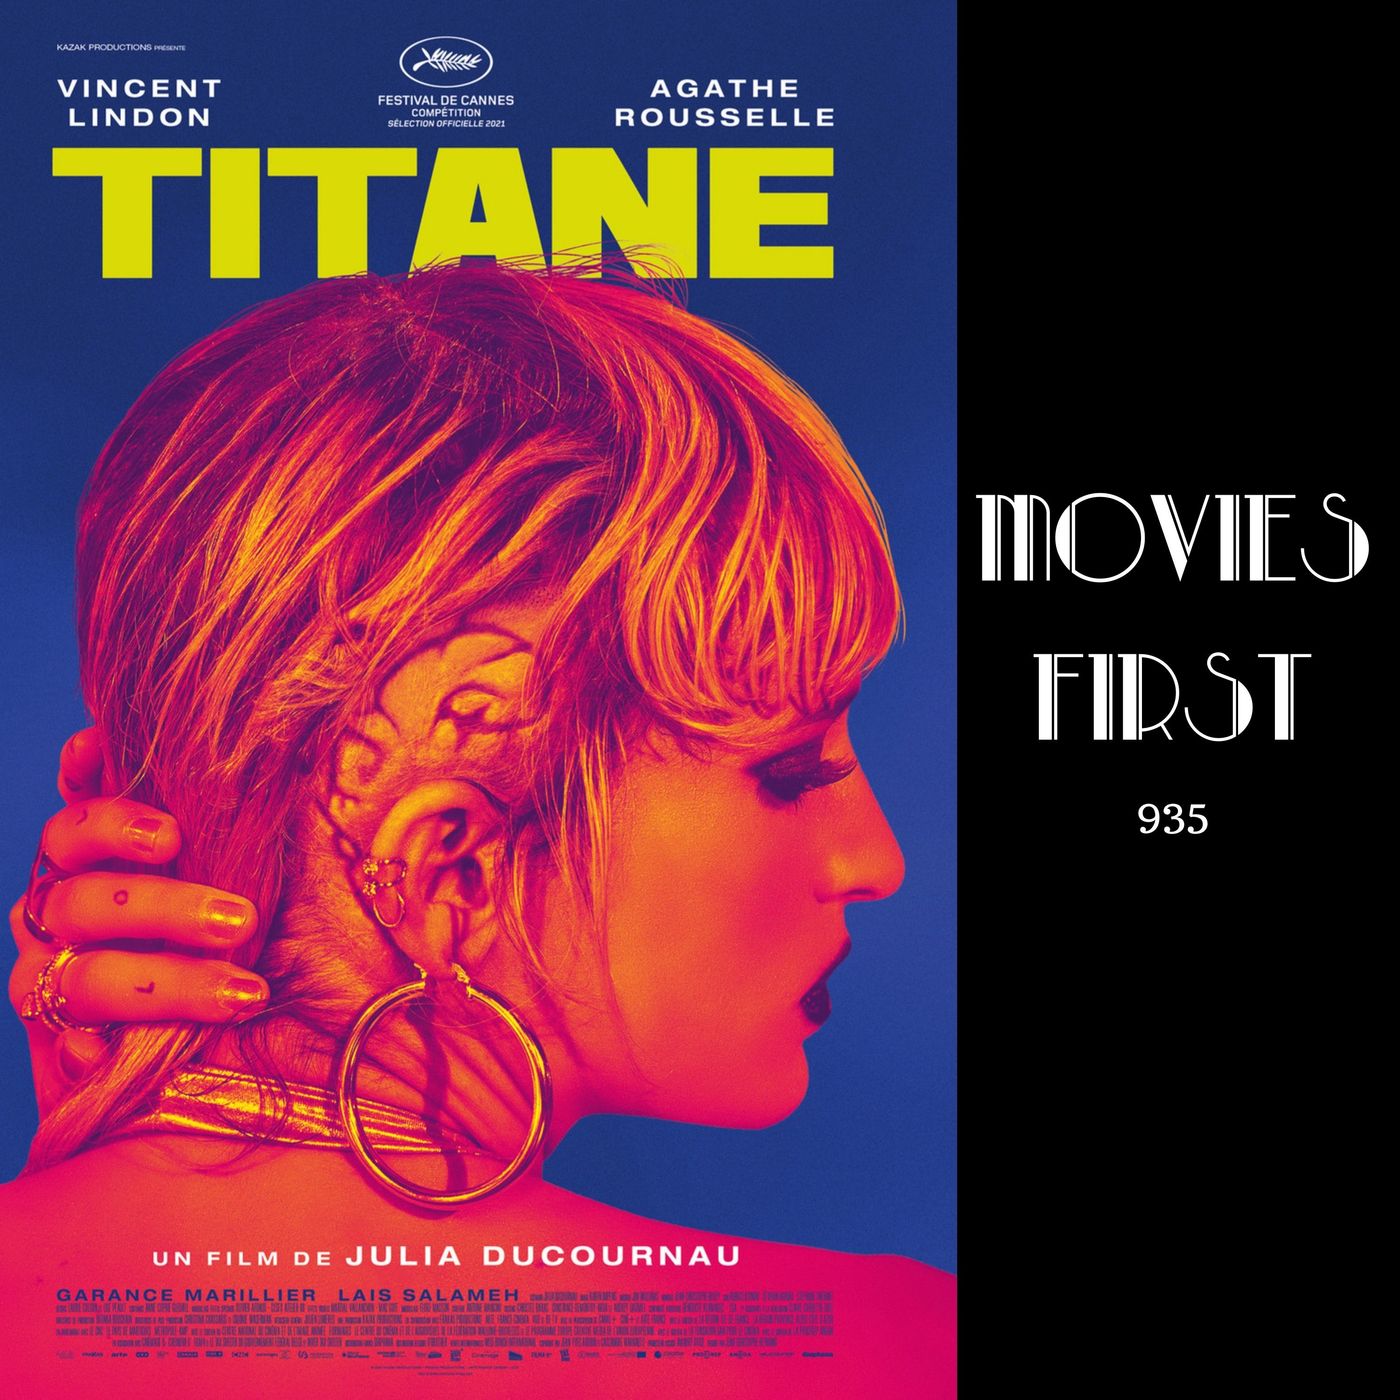 Titane (Drama, Horror, Sci-Fi) (The @MoviesFirst review)